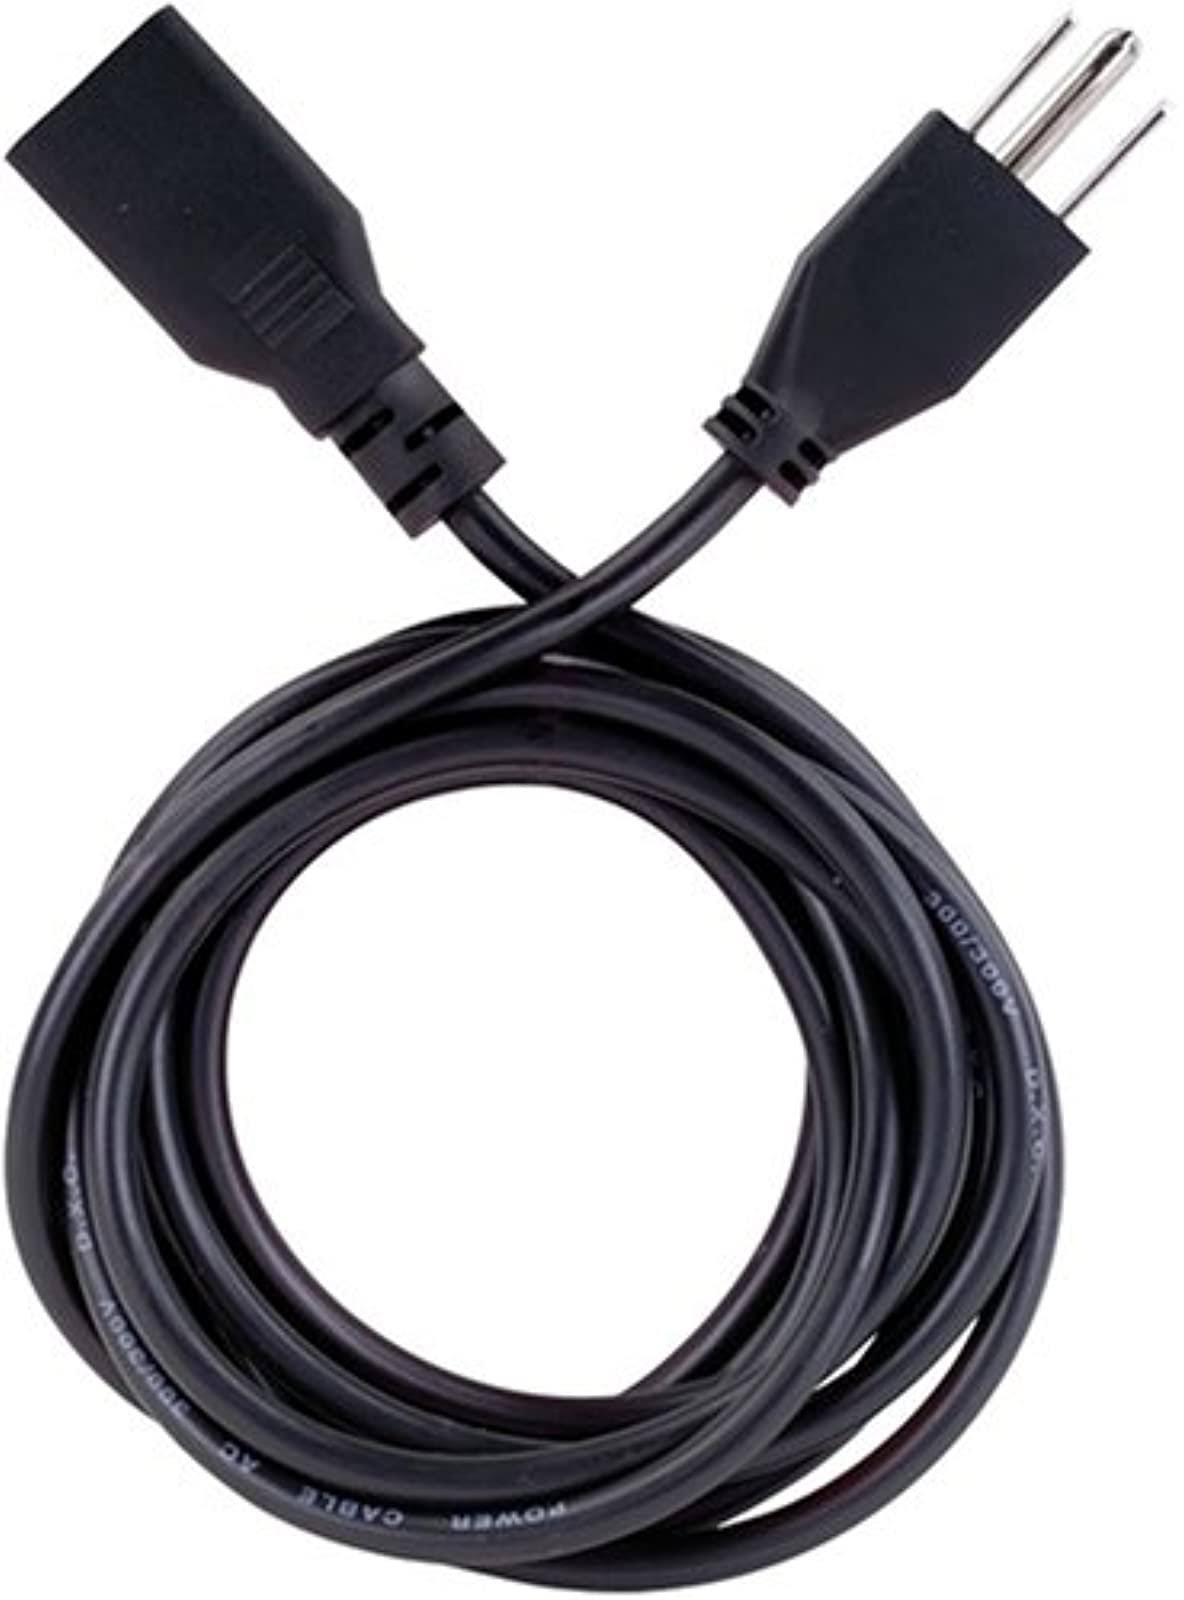 PS3 Power Cable